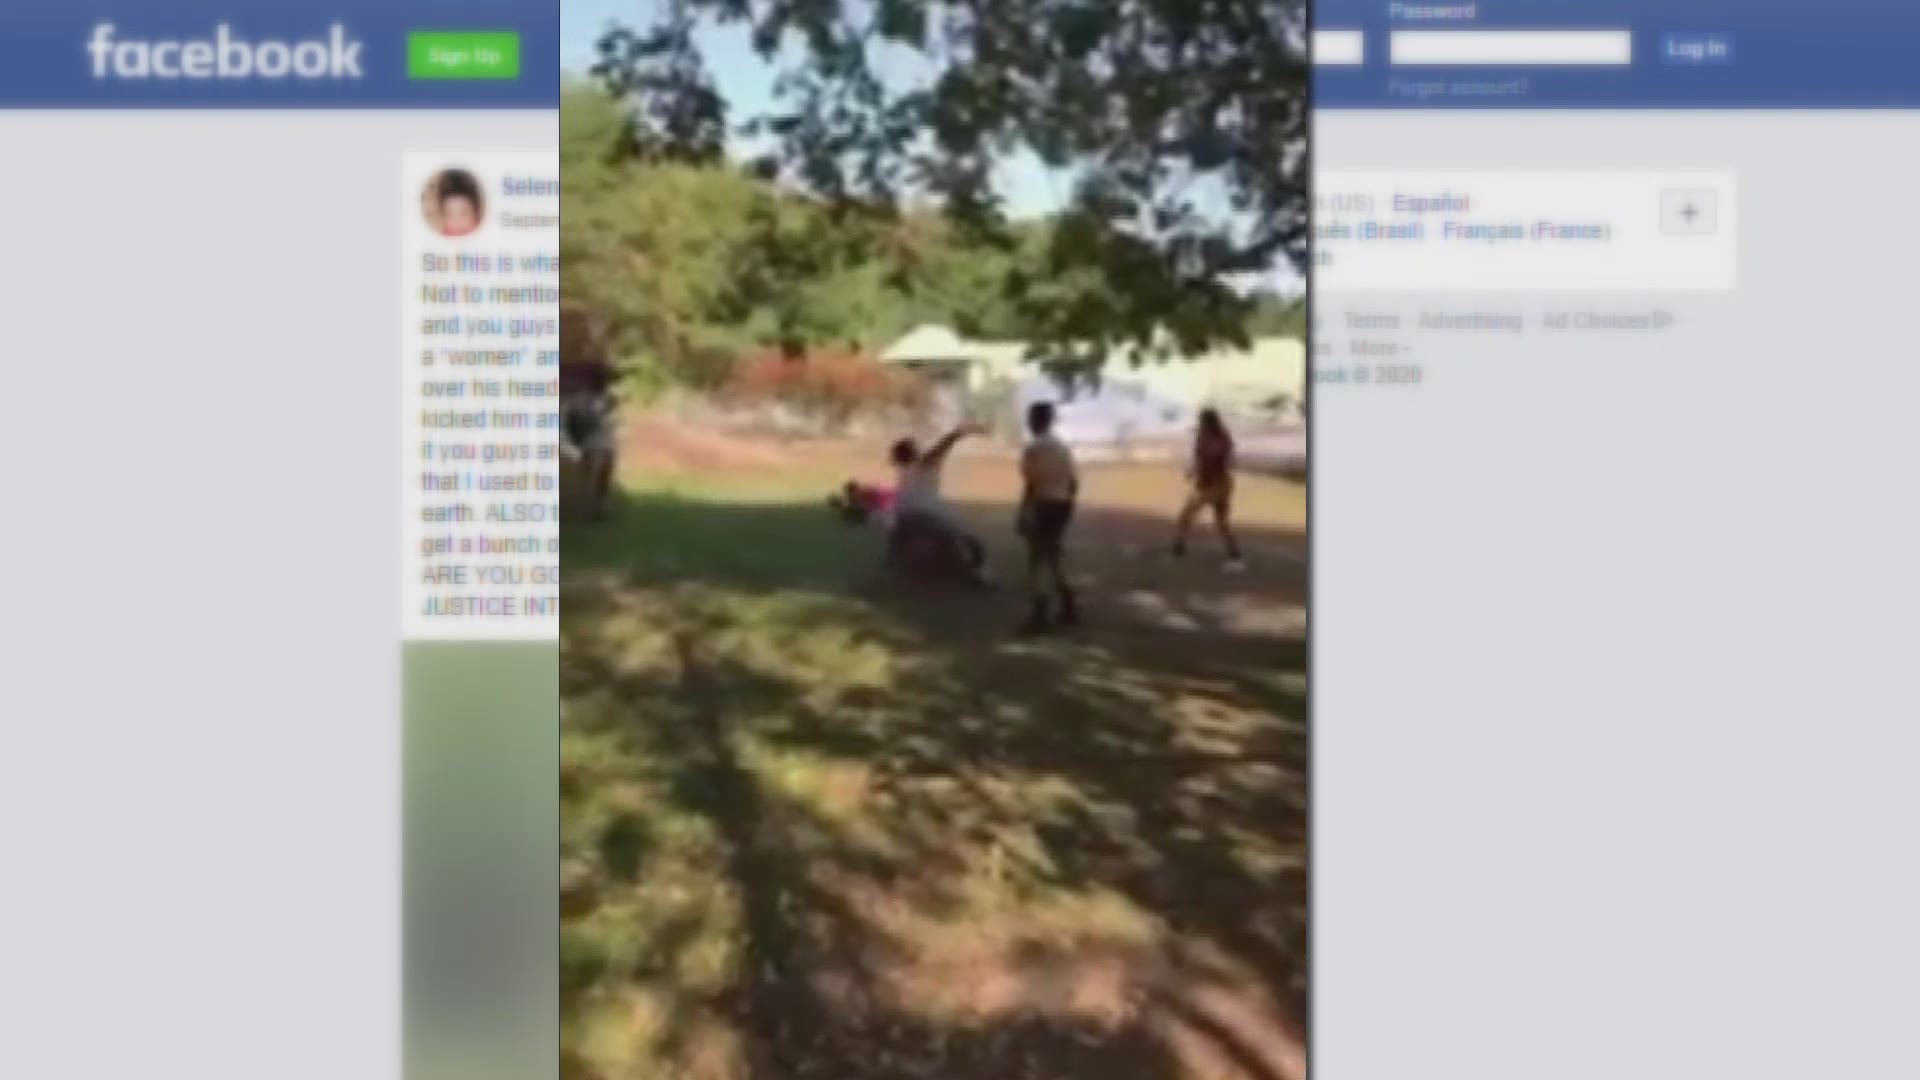 A shocking video has surfaced on social media that shows teens in a vicious fistfight. Oxford Hills area parents and teens are upset